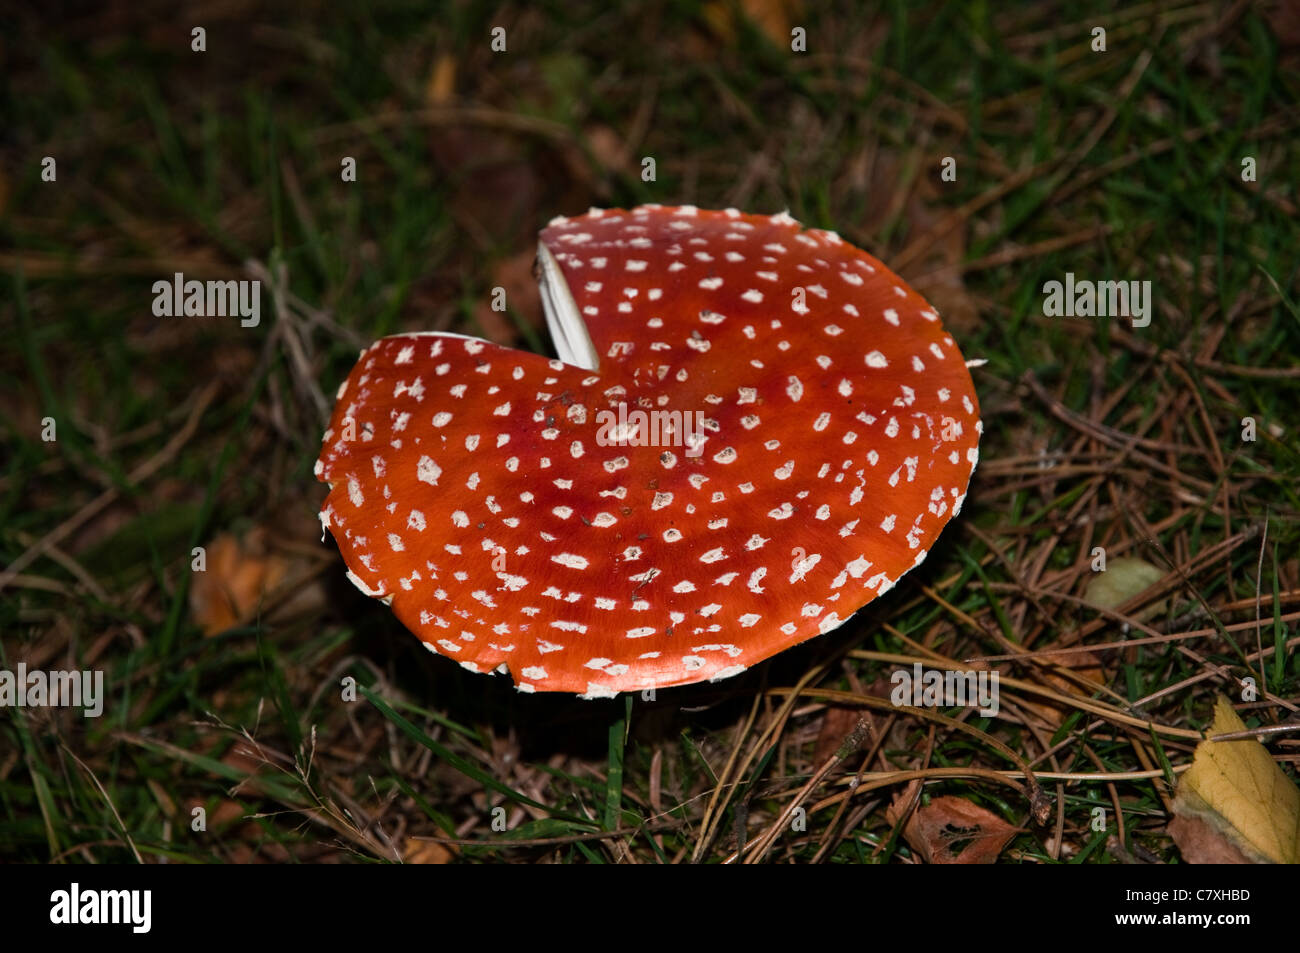 Fly Agaric mushrooms in the grass Stock Photo